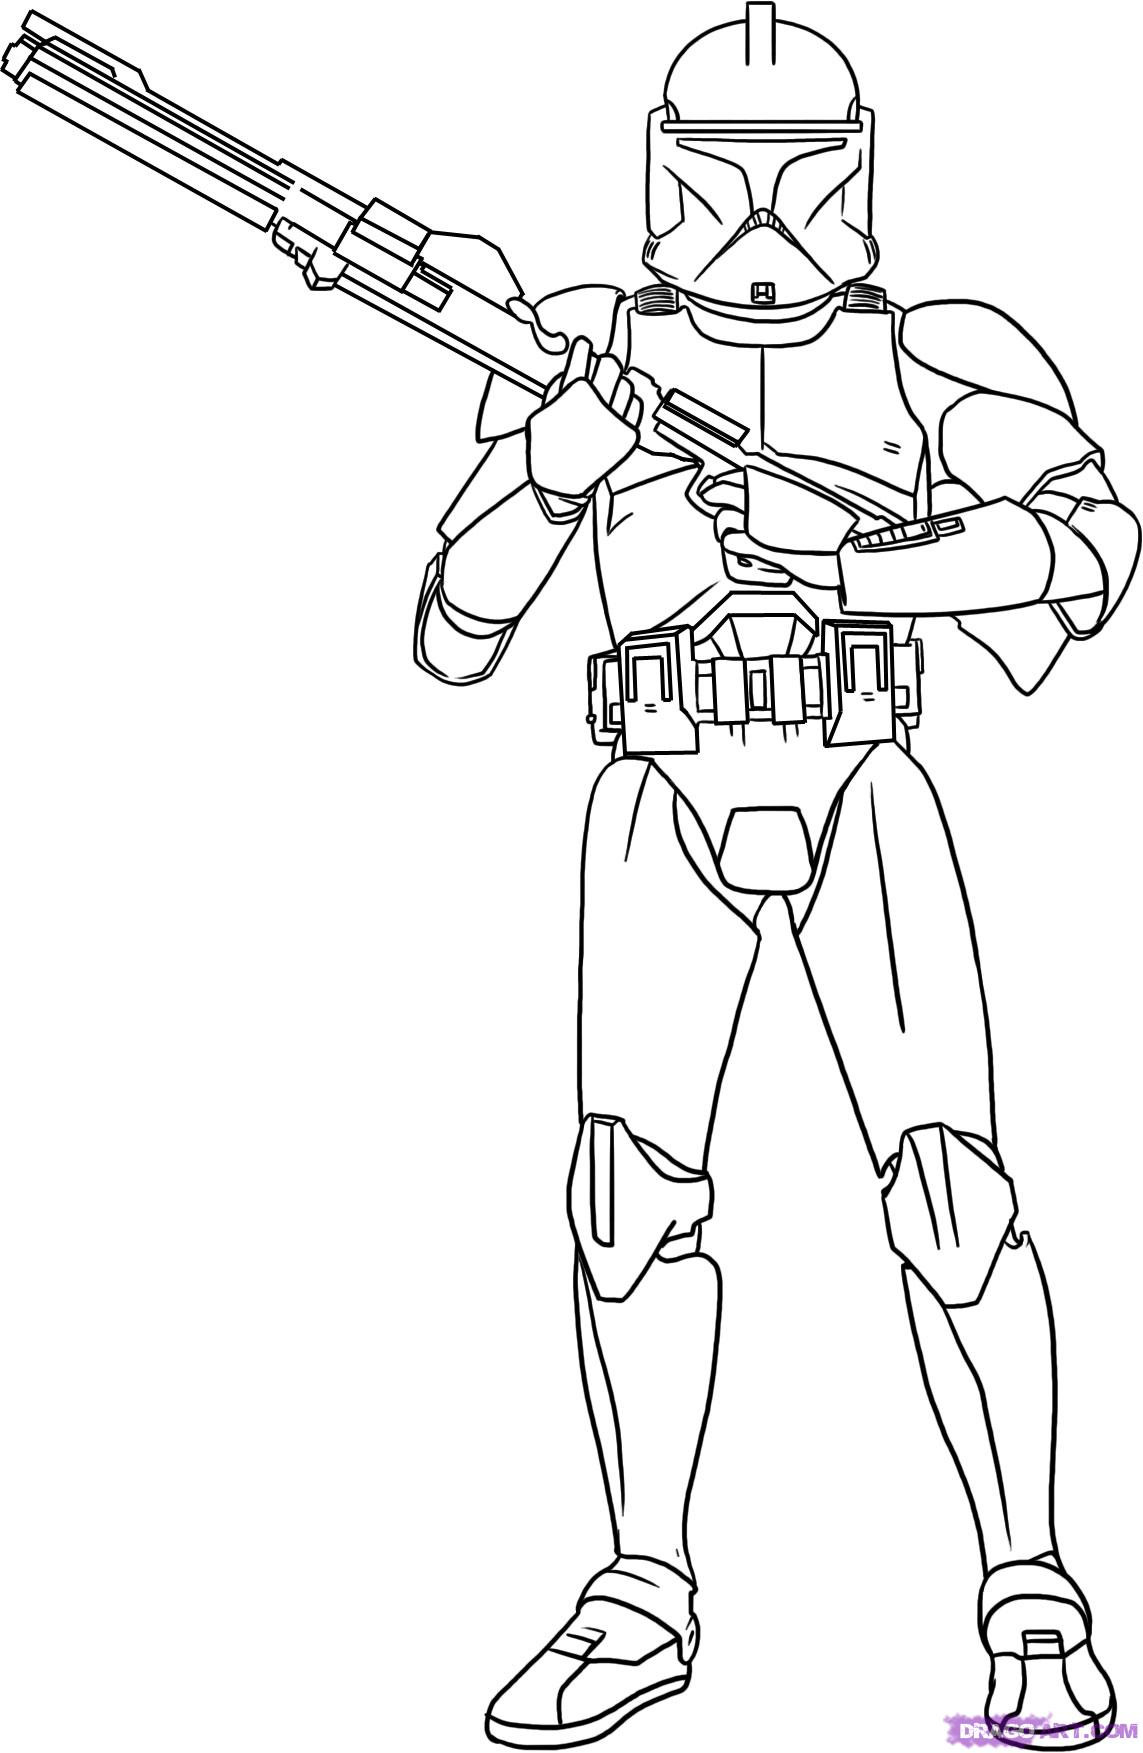 Star Wars Coloring Pages Printable
 Free Printable Star Wars Coloring Pages For Kids